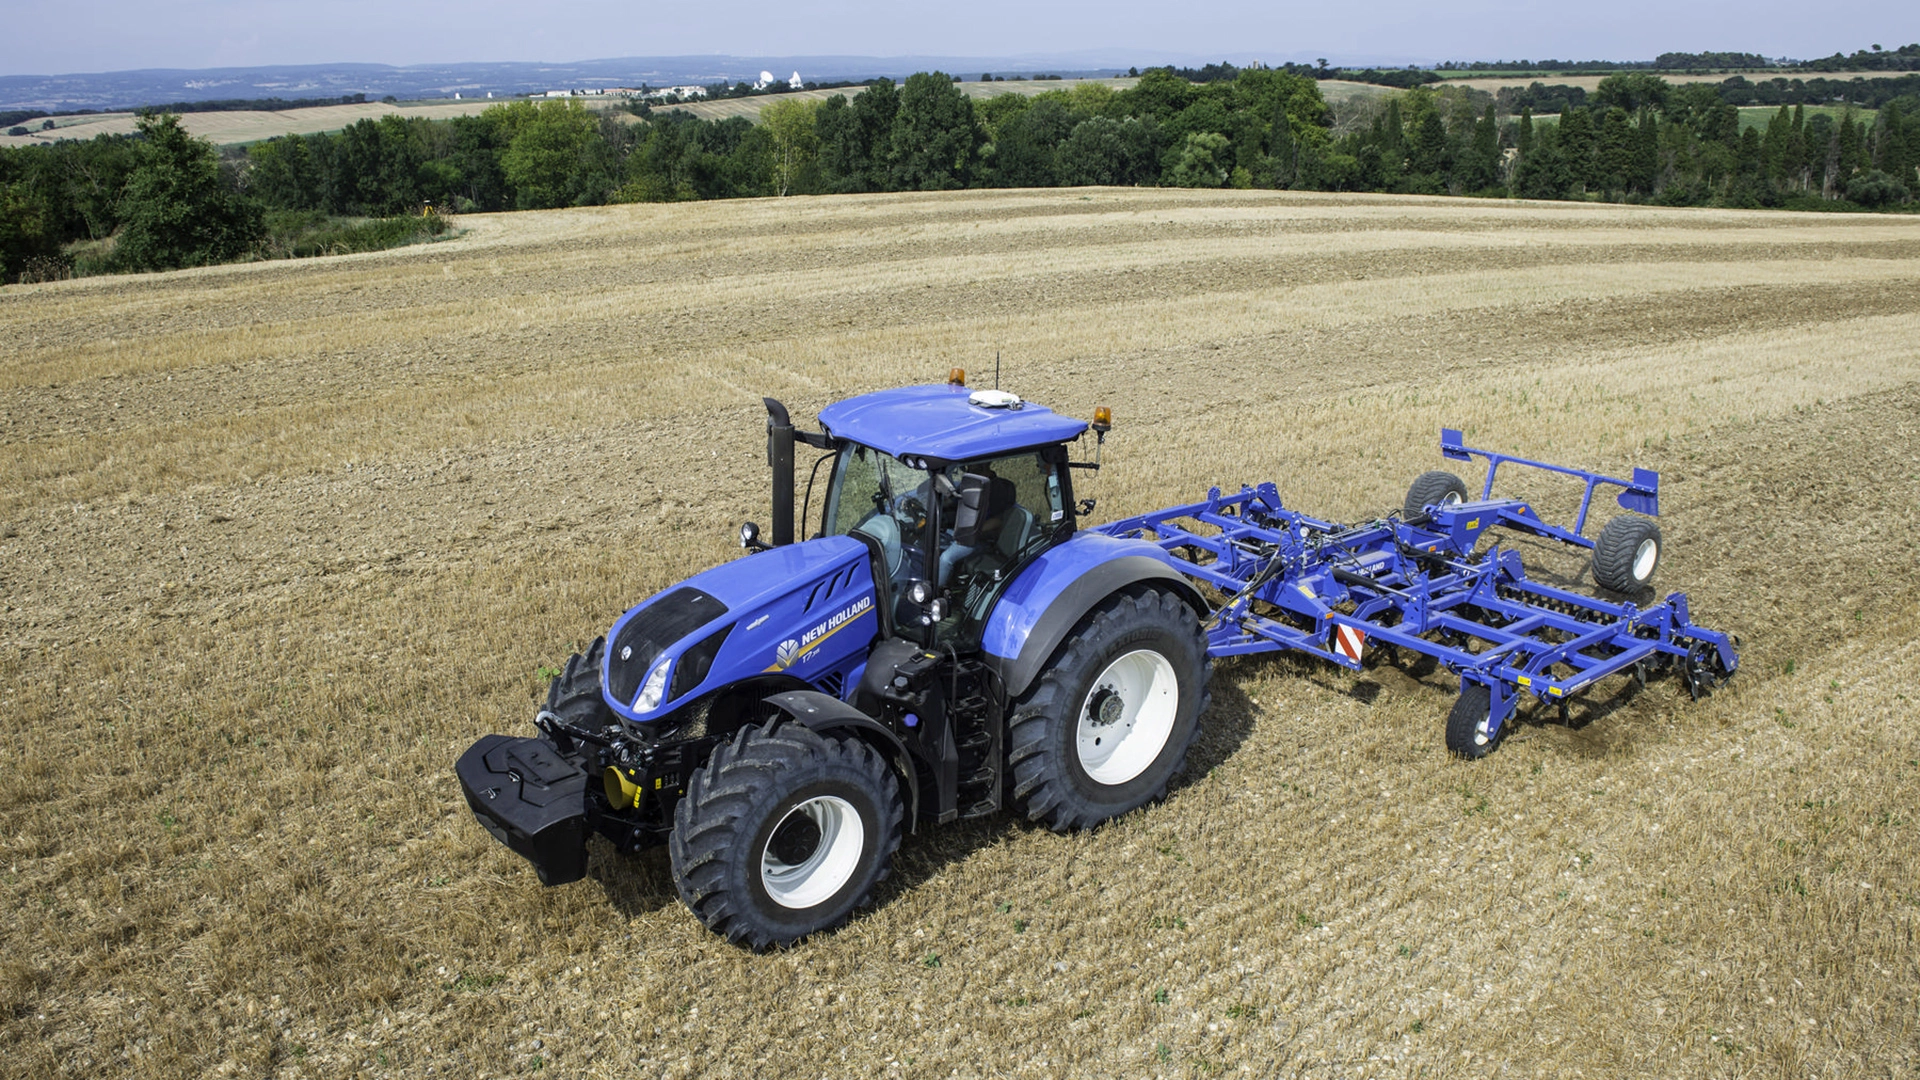 On-field operation of tractor-mounted stubble cultivator with rigid tine cultivator and rear rollers